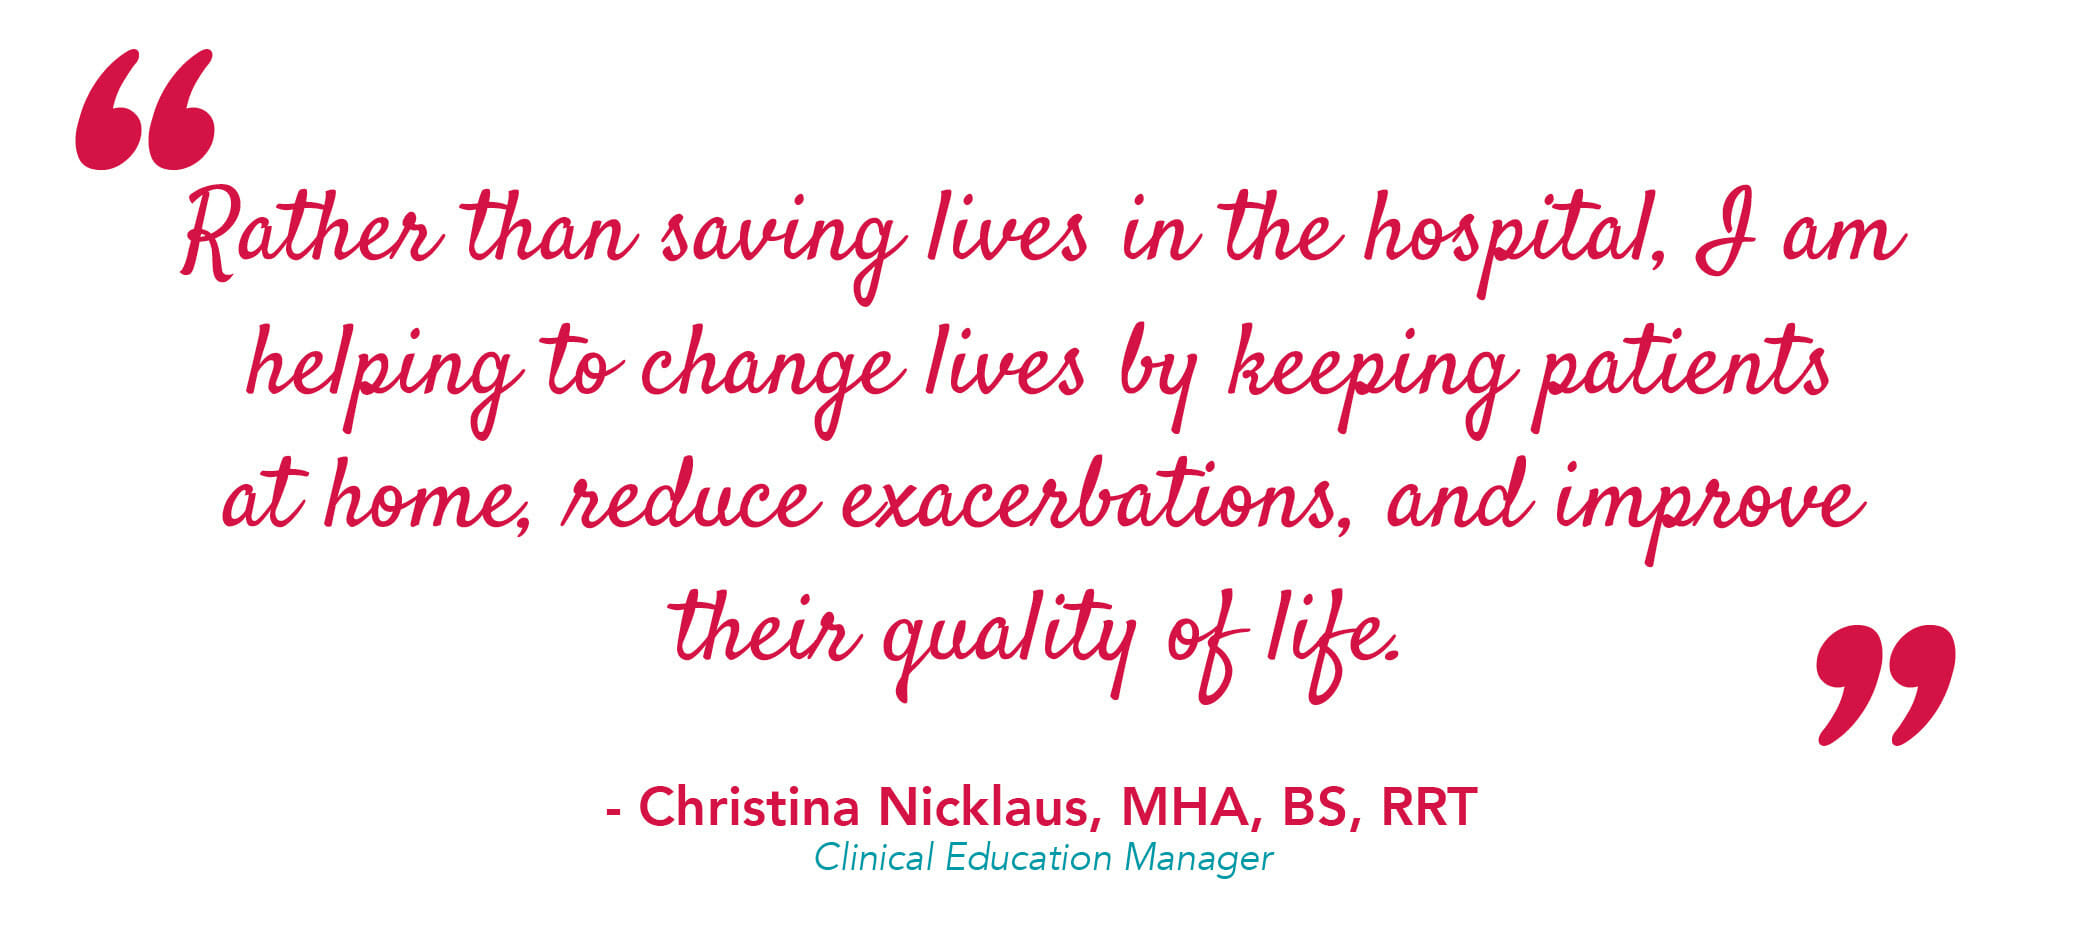 Pull quote by Christina Nicklaus, MHA, BS, RRT.